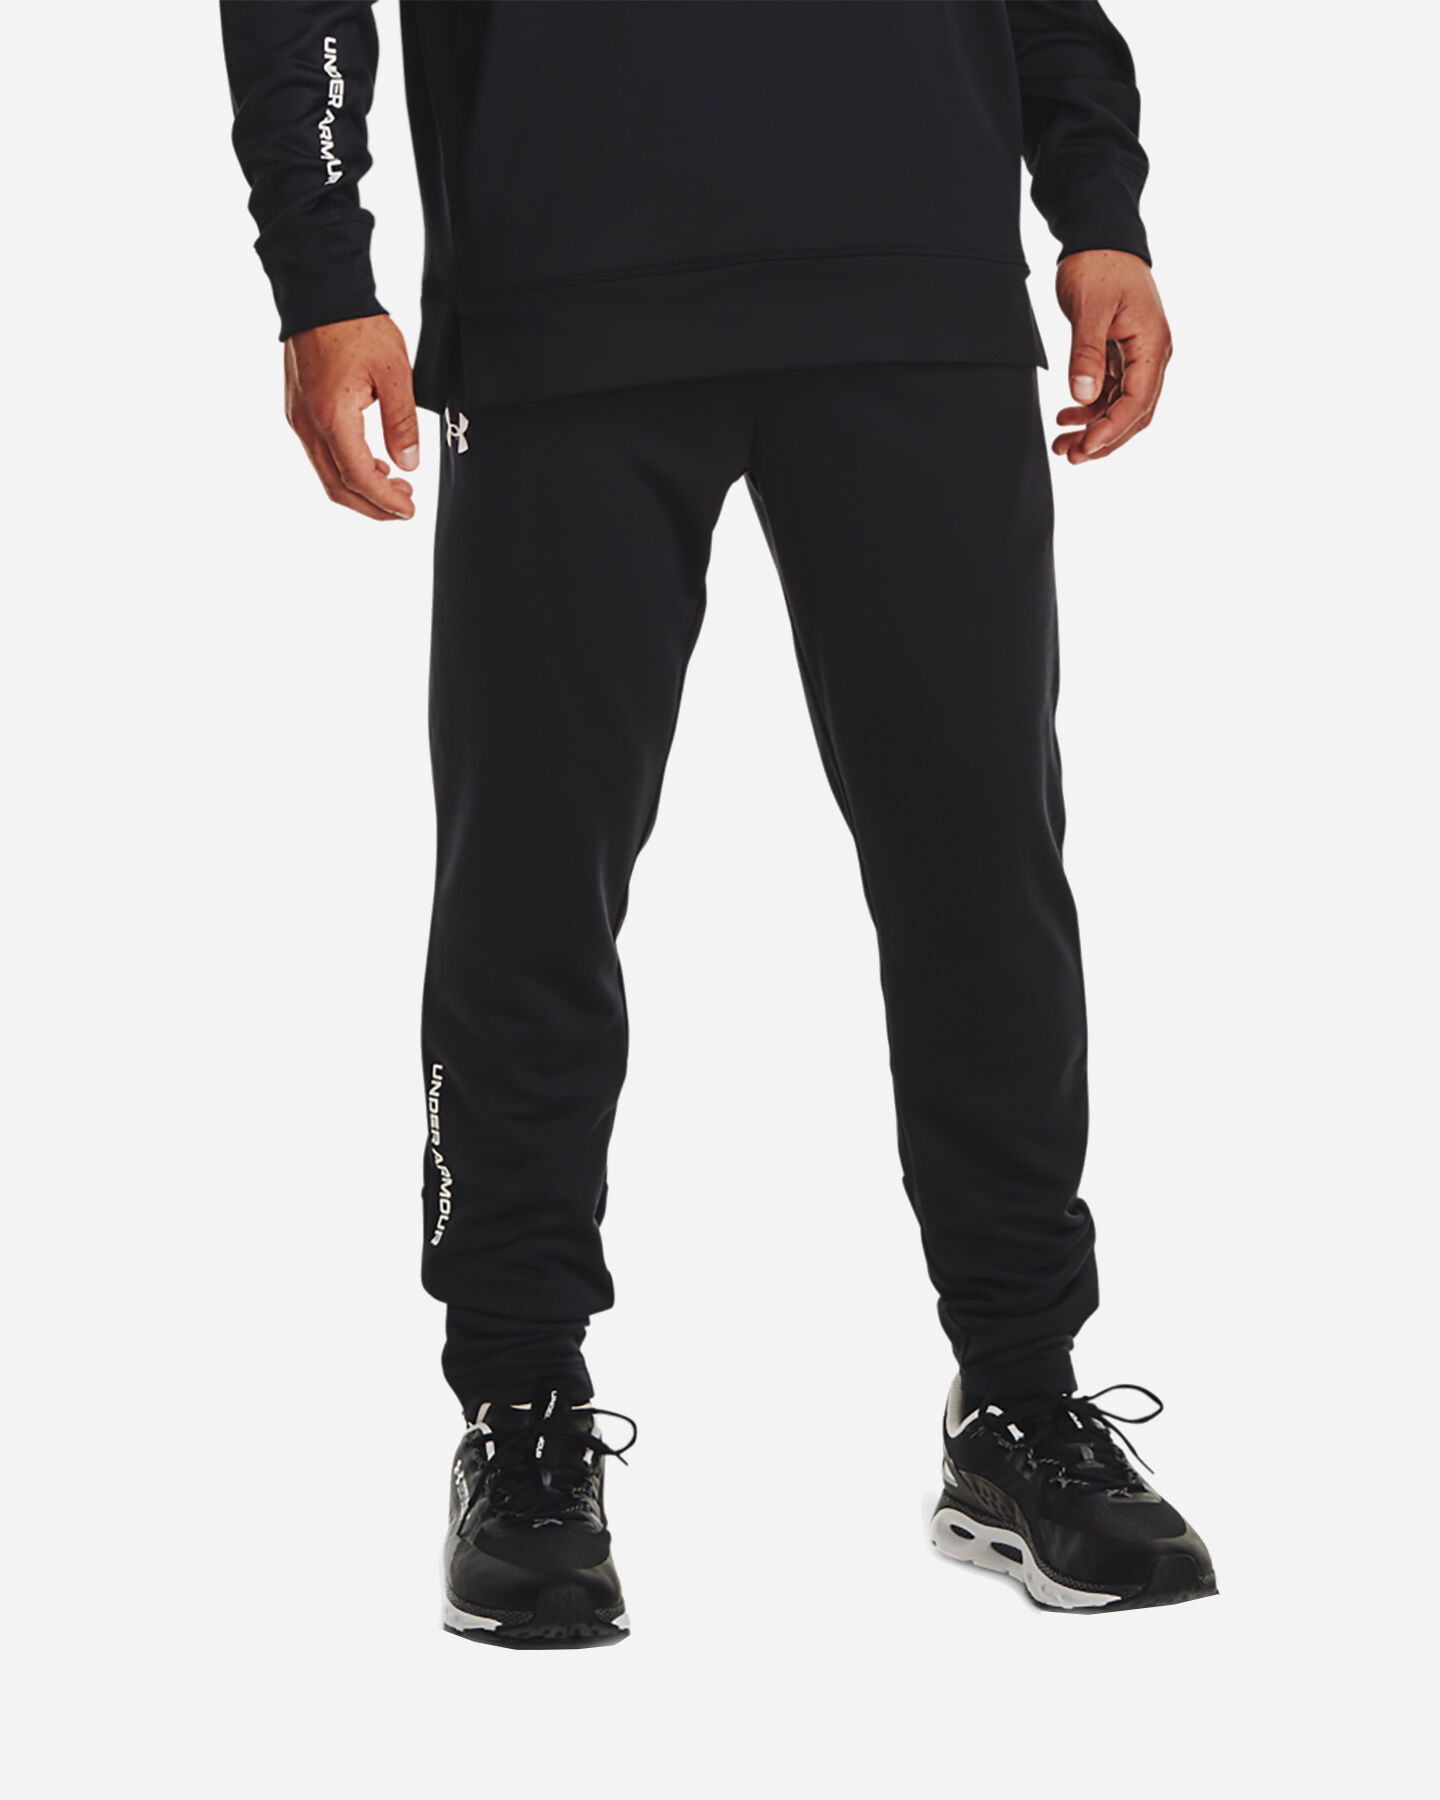  Pantalone UNDER ARMOUR AMP M S5336607|0001|XS scatto 2